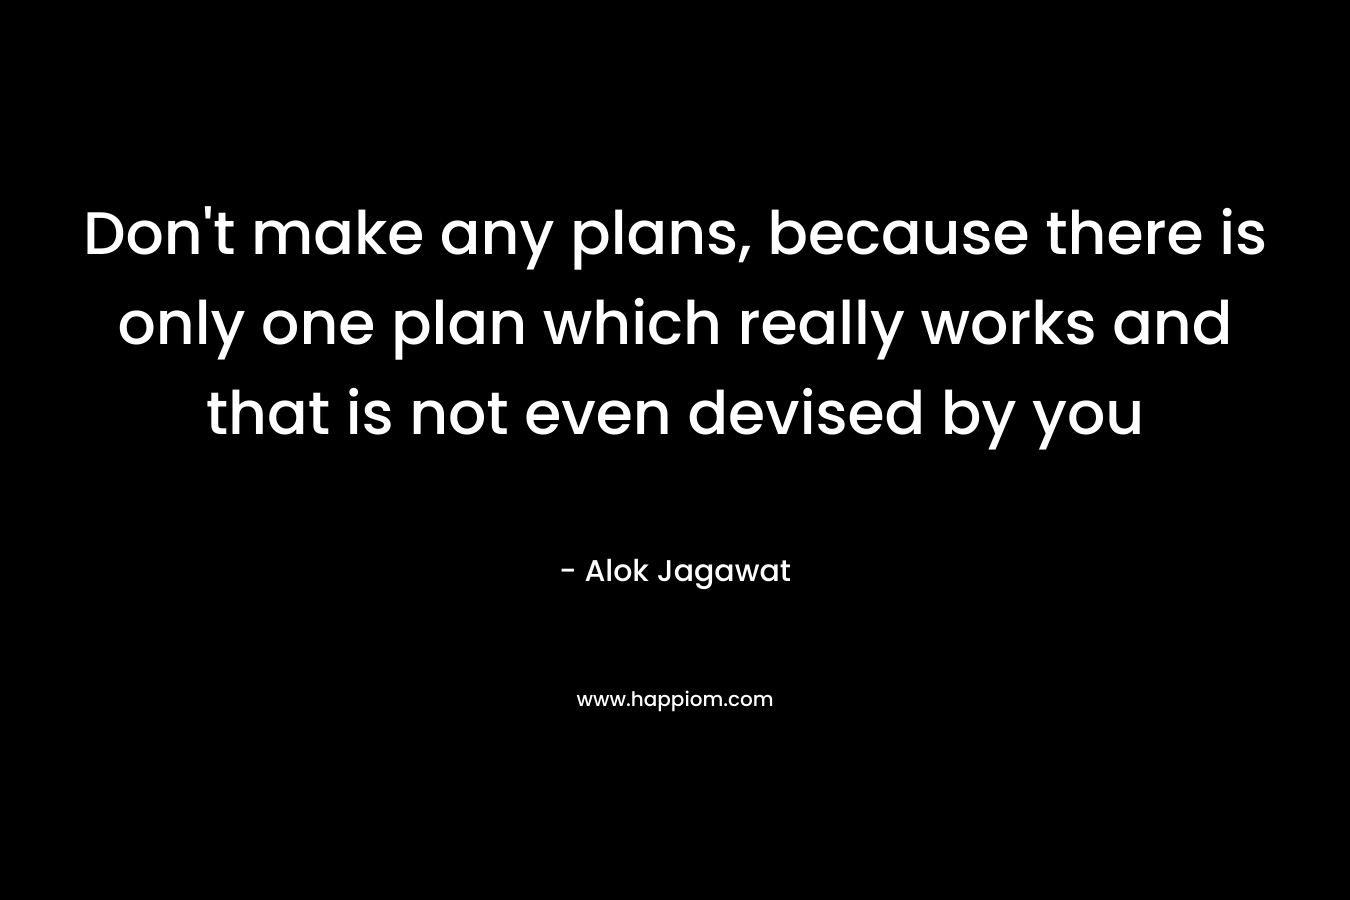 Don’t make any plans, because there is only one plan which really works and that is not even devised by you – Alok Jagawat